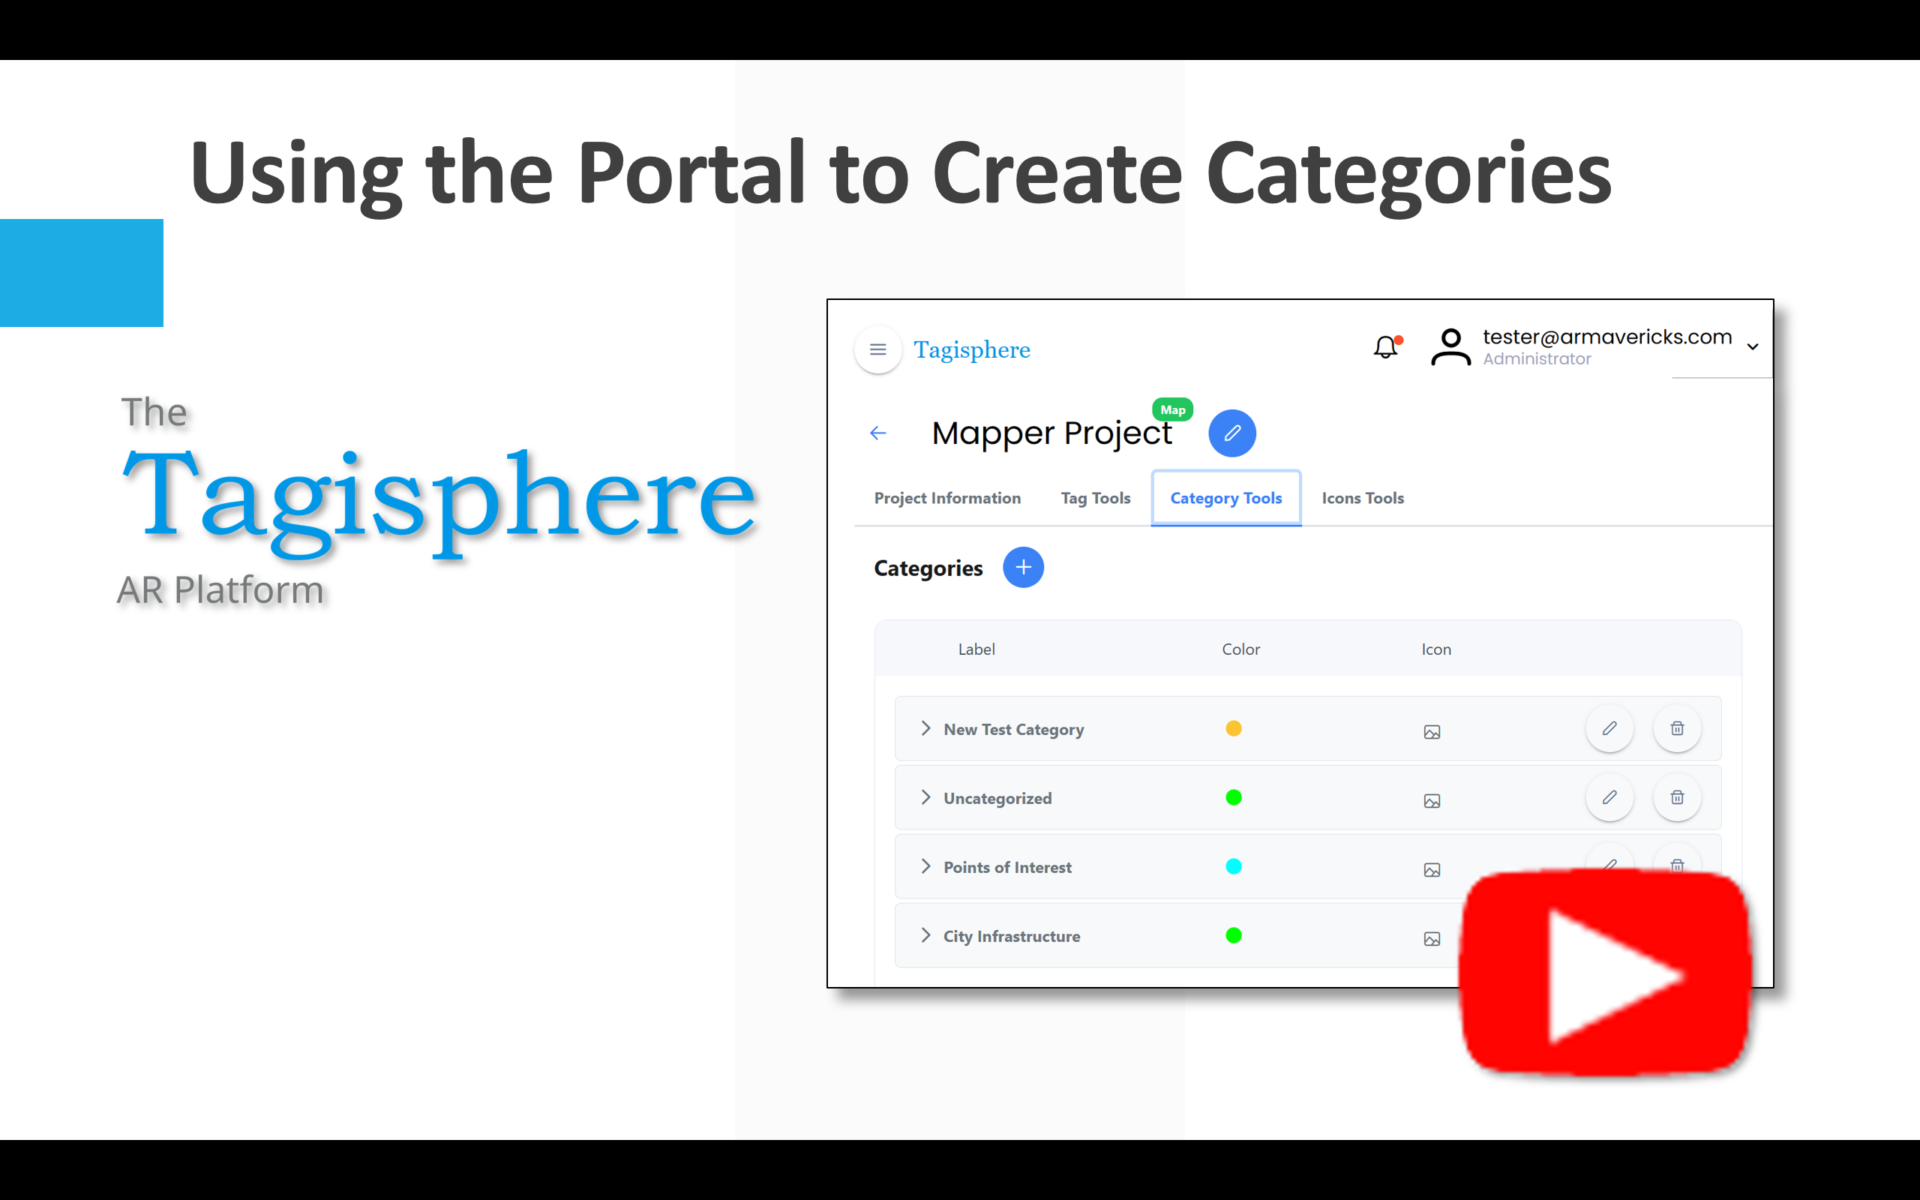 Use the Tagisphere AR Portal to Create Categories